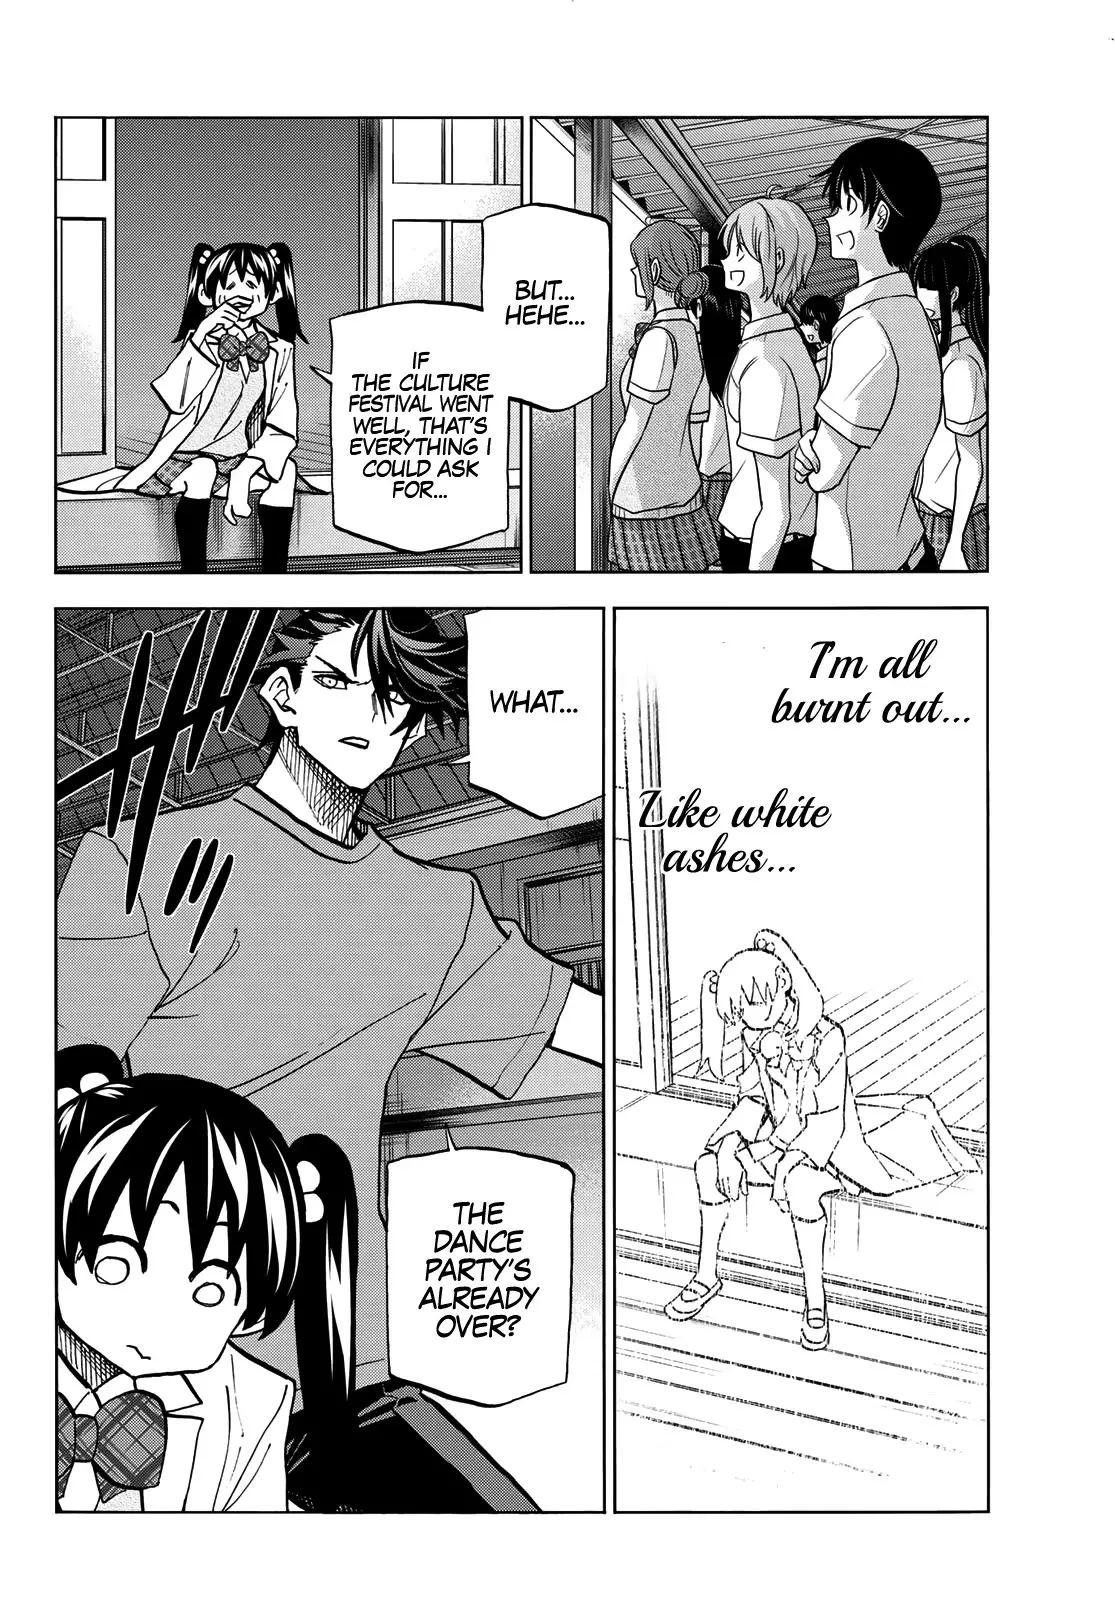 The Story Between A Dumb Prefect And A High School Girl With An Inappropriate Skirt Length - 34 page 37